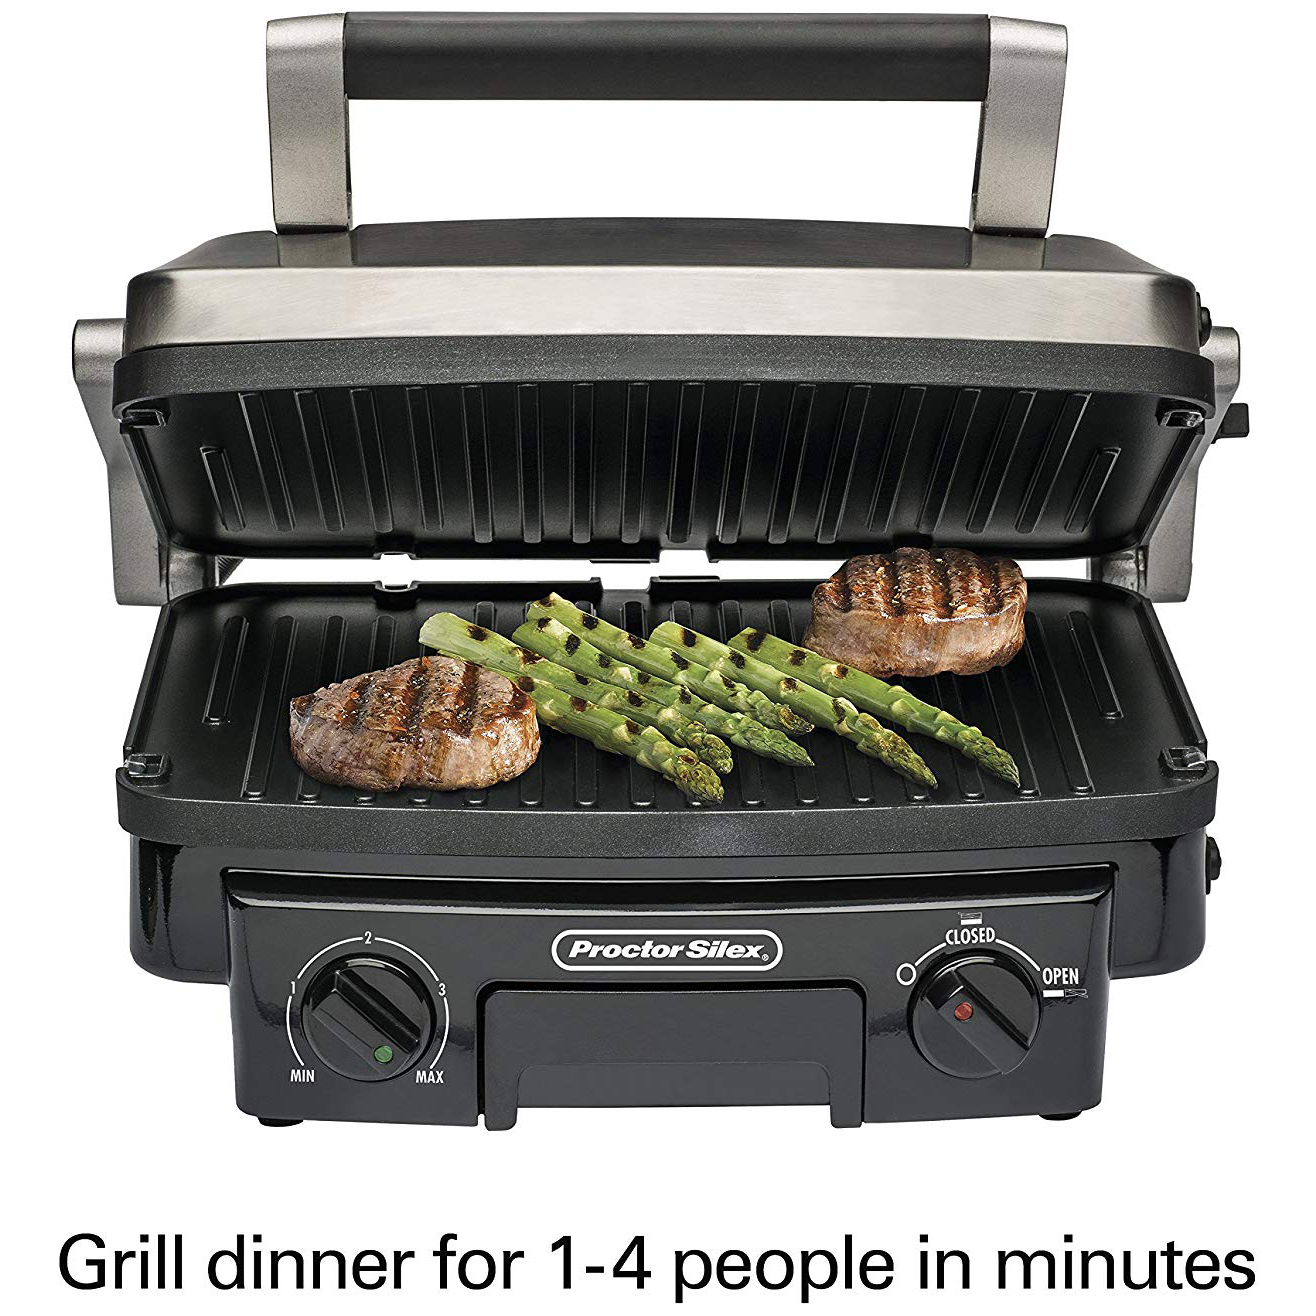 Proctor Silex Contact Grill with Reversible Grids - image 3 of 9